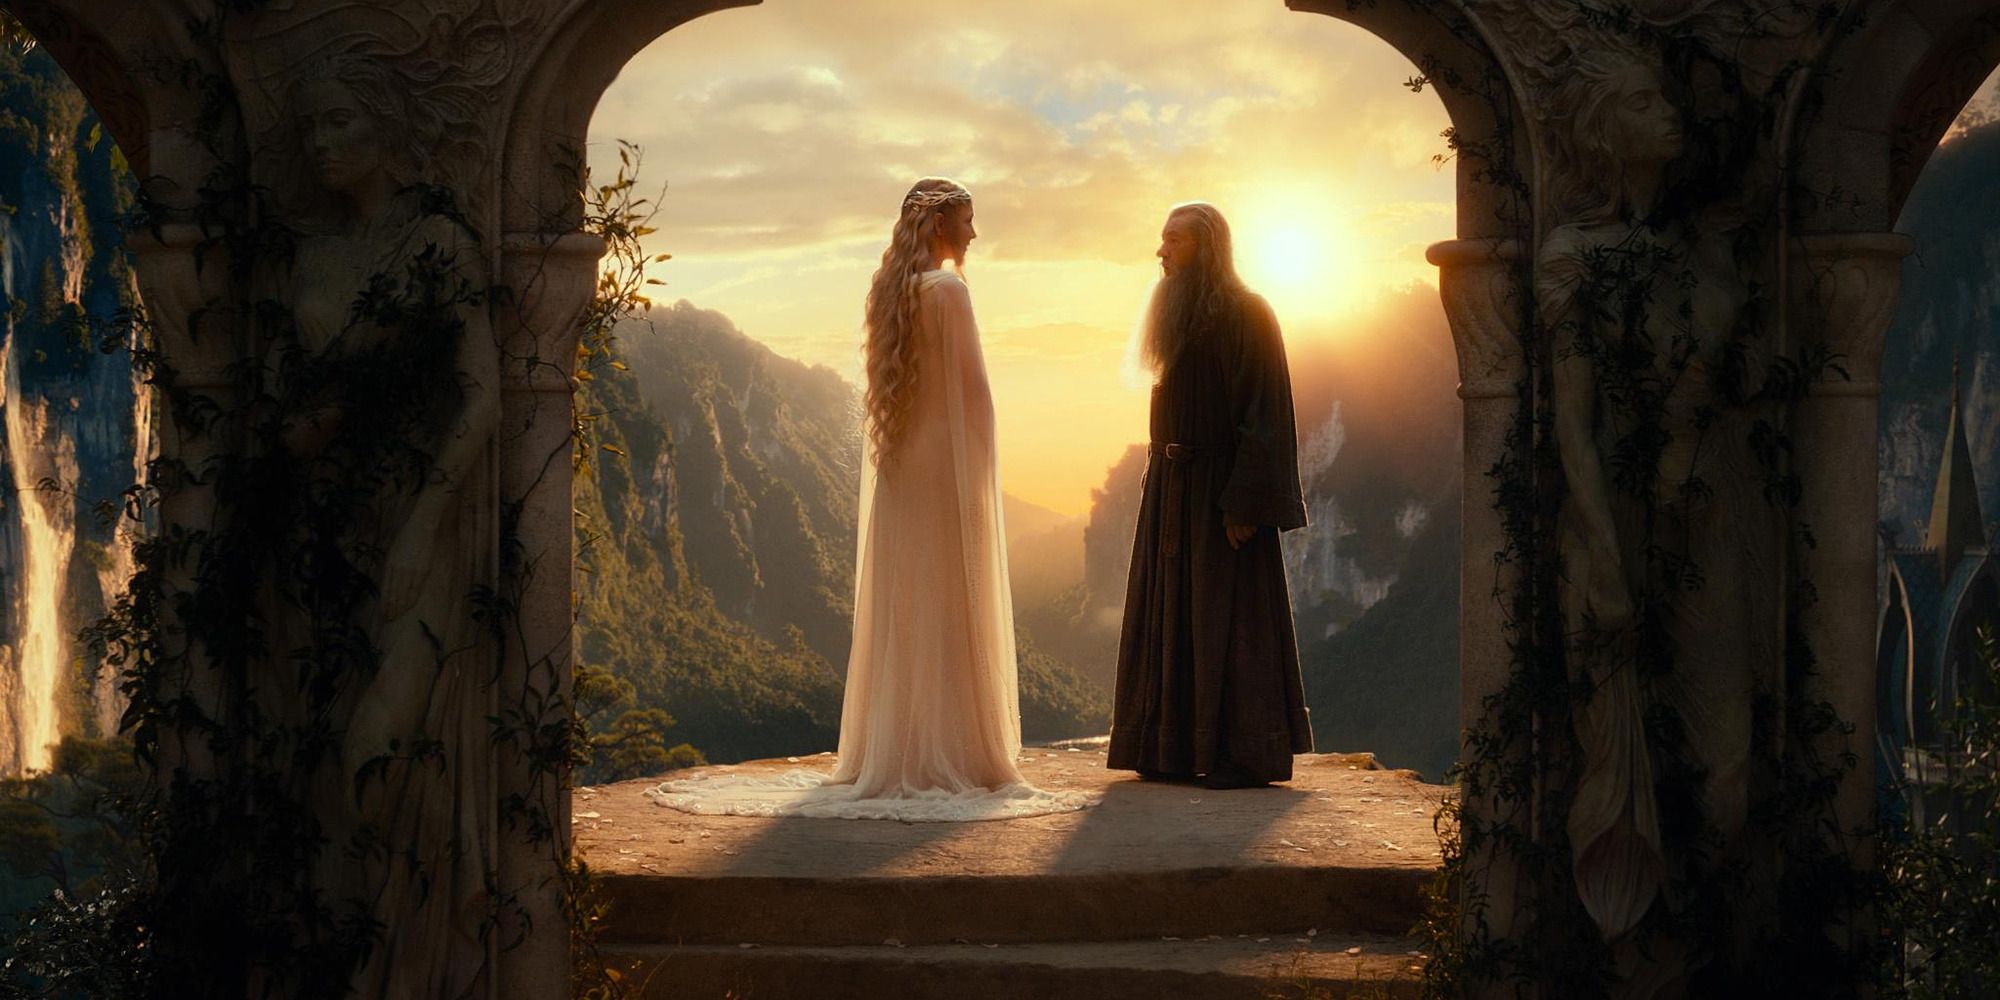 Galadriel and Gandalf speaking in a balcony in Rivendel in 'The Hobbit: An Unexpected Journey'